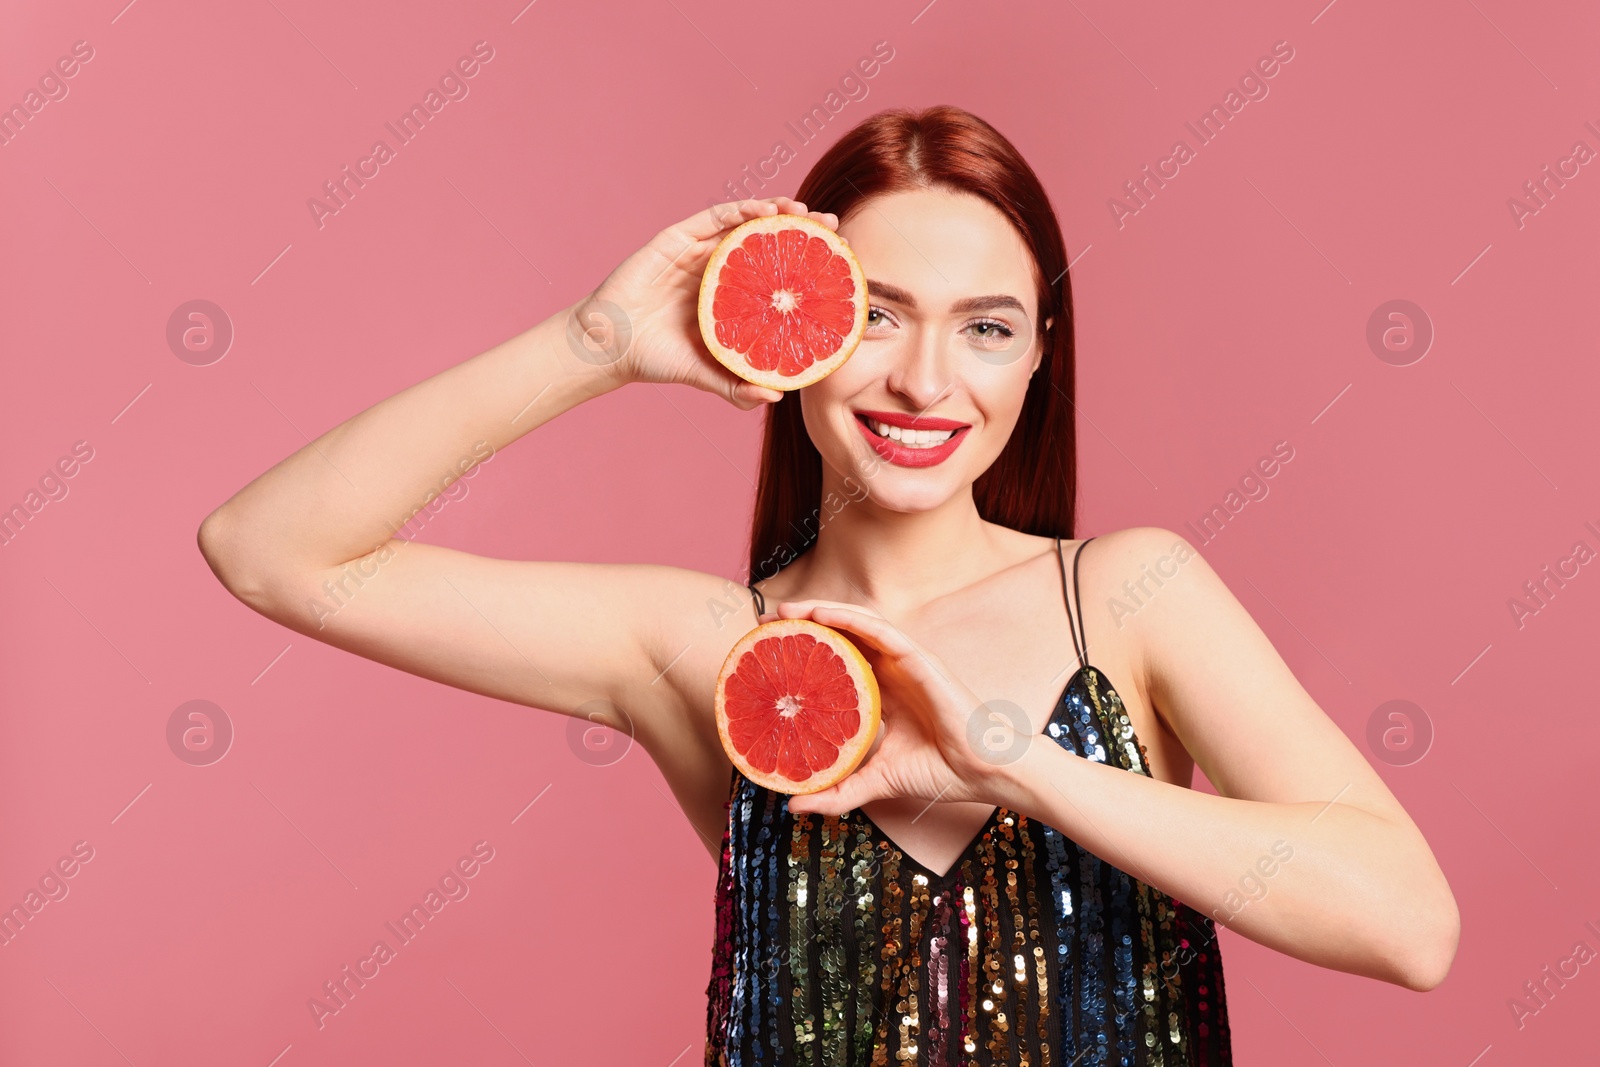 Photo of Happy woman with red dyed hair and grapefruits on pink background